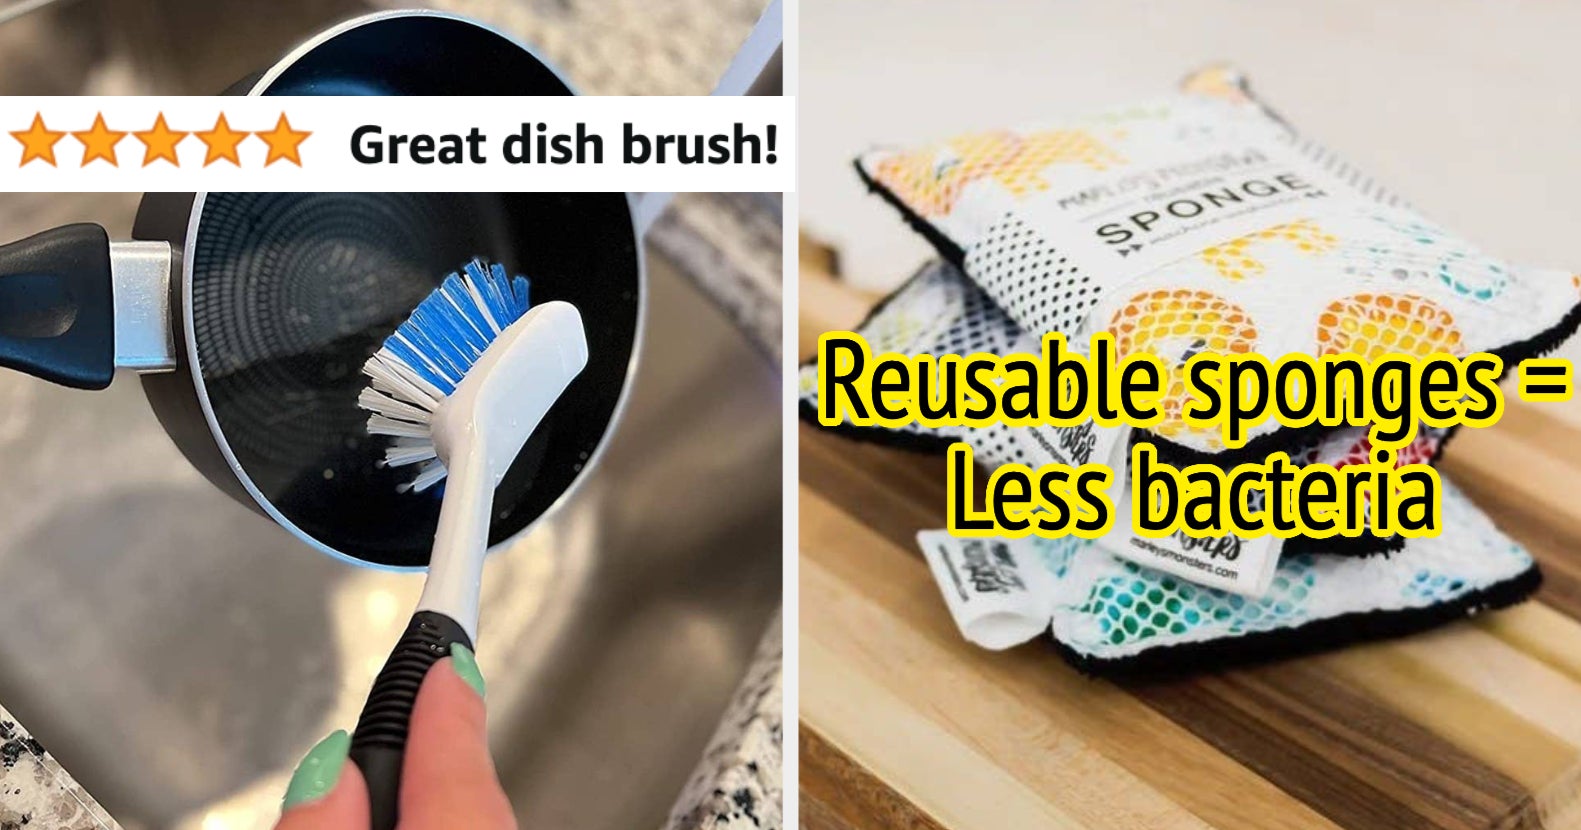 Dish washing products: 17 gadgets to improve your least favorite chore